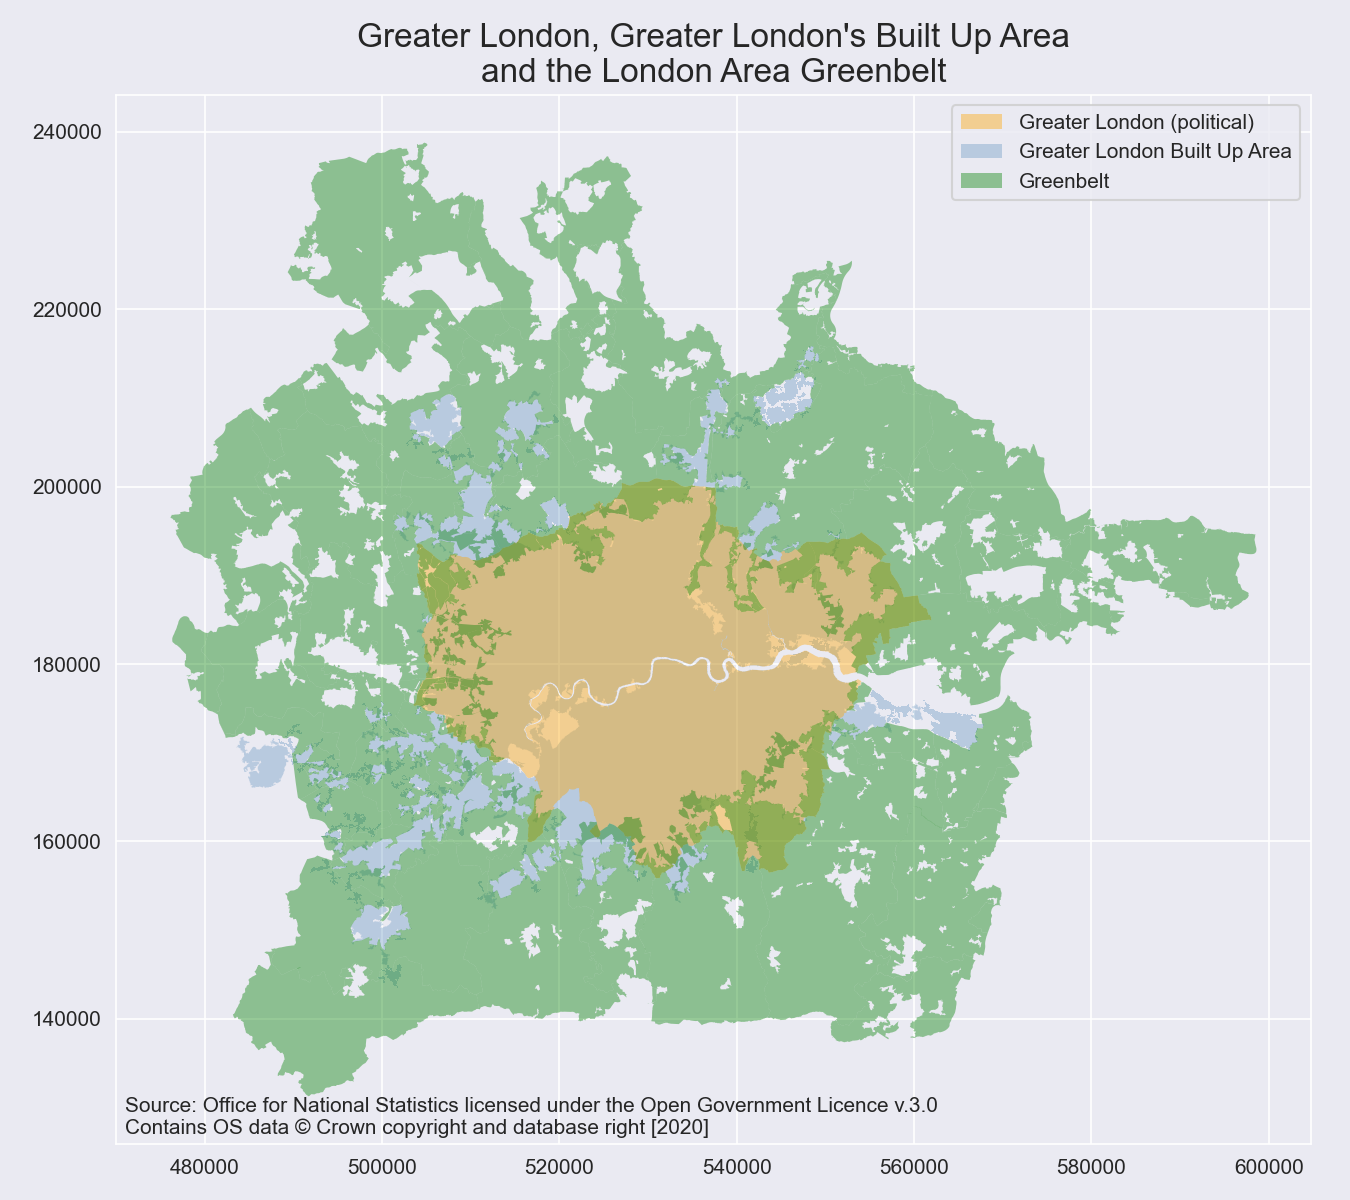 Greater London, its built up area and the London Area Greenbelt